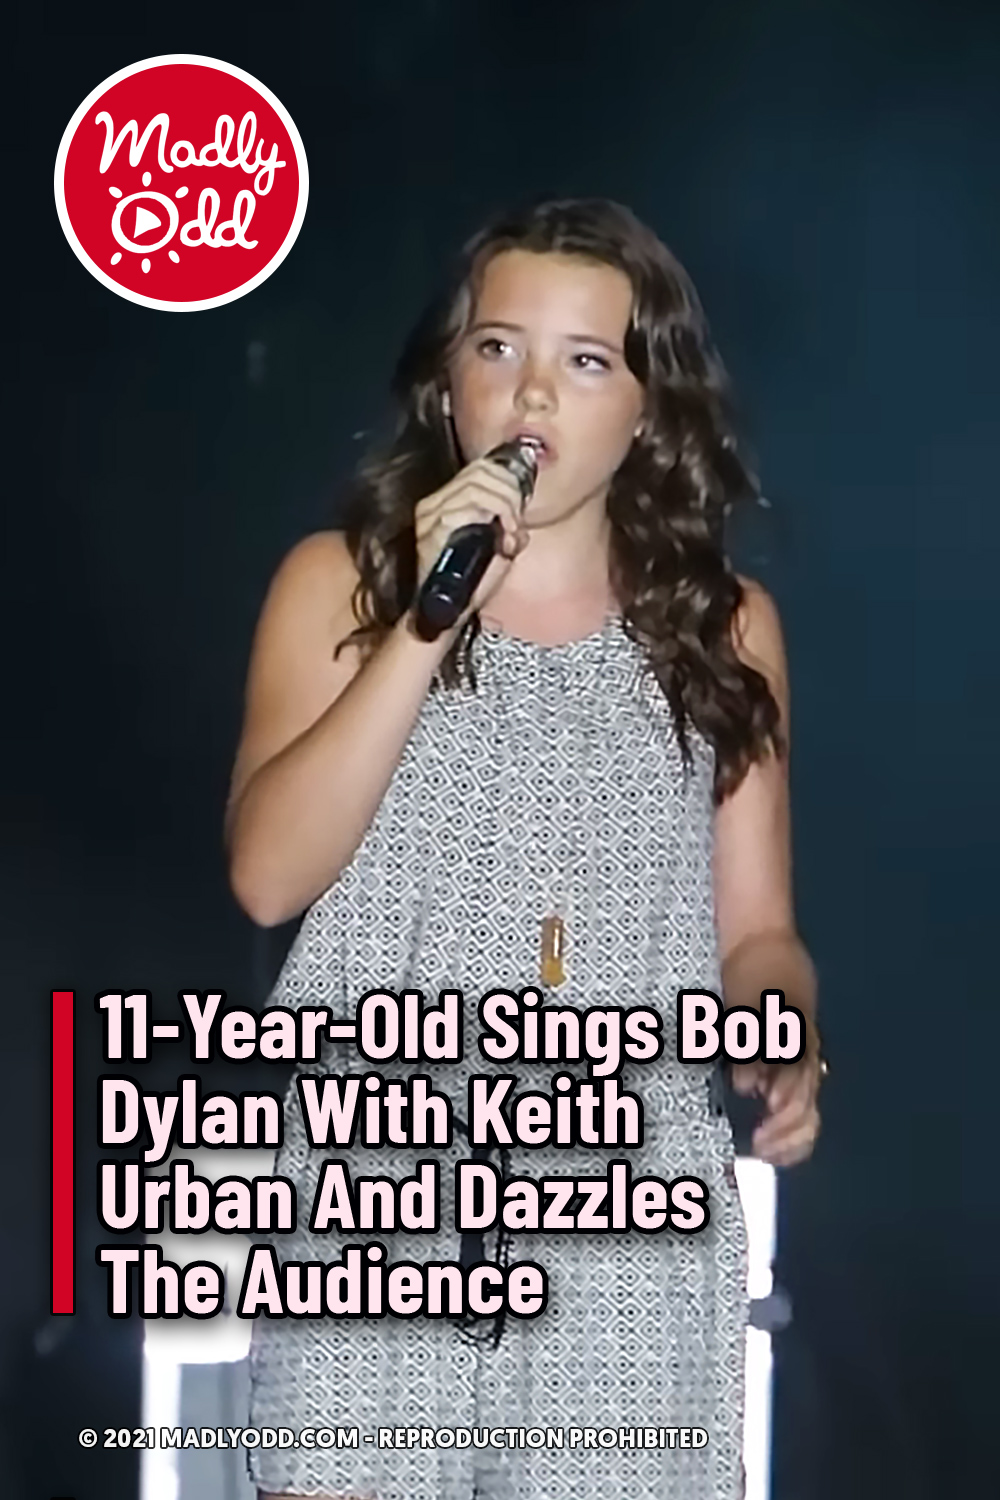 11-Year-Old Sings Bob Dylan With Keith Urban And Dazzles The Audience